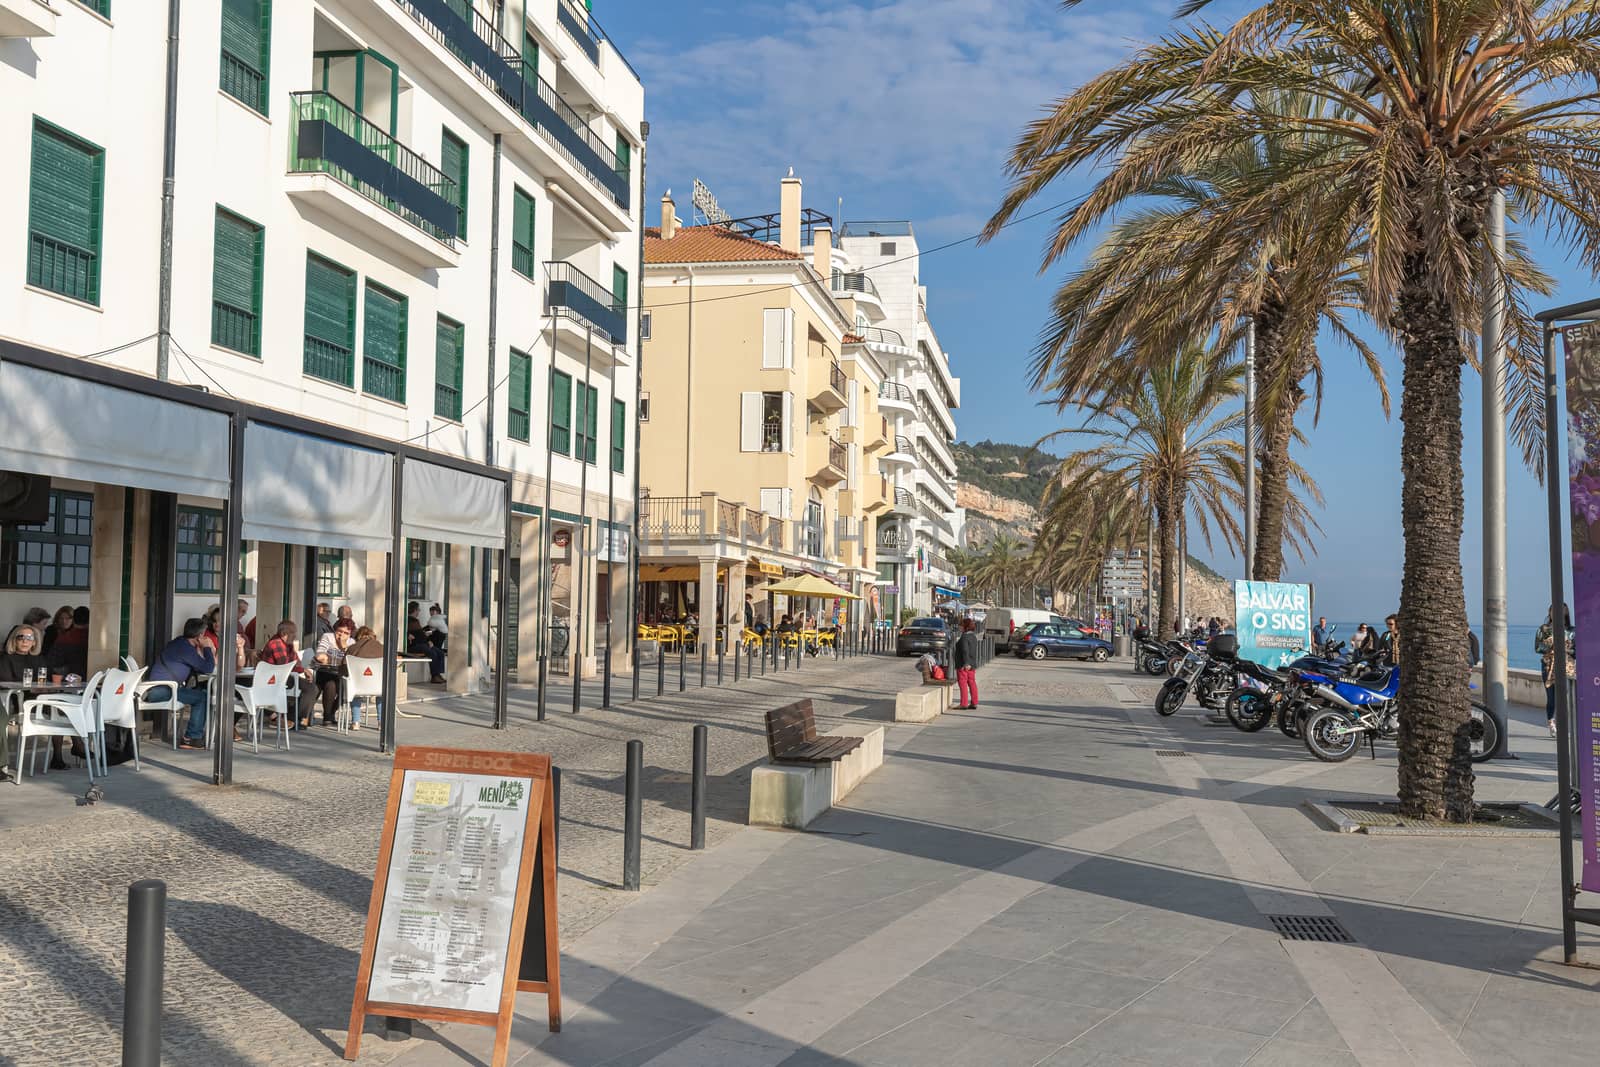 View of the city center of Sesimbra by the sea by AtlanticEUROSTOXX